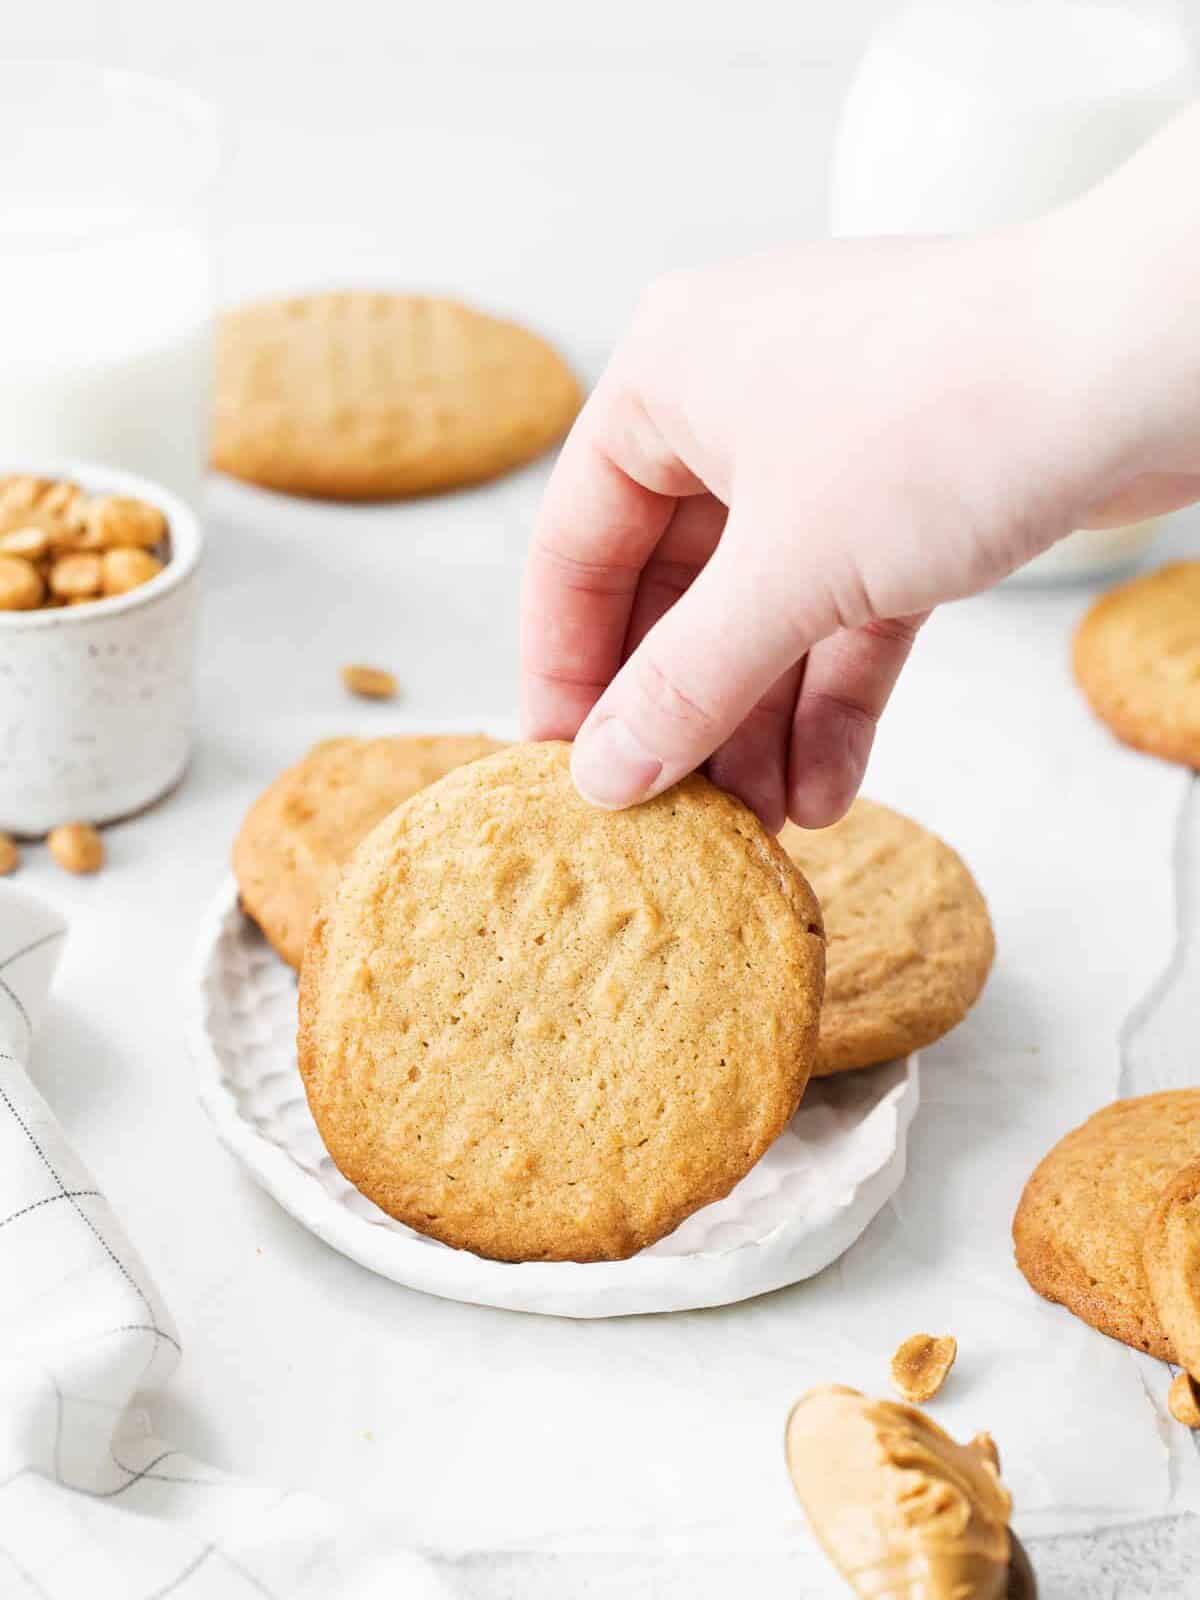 a hand grabbing 1 of 3 brown butter peanut butter cookies from a white plate.